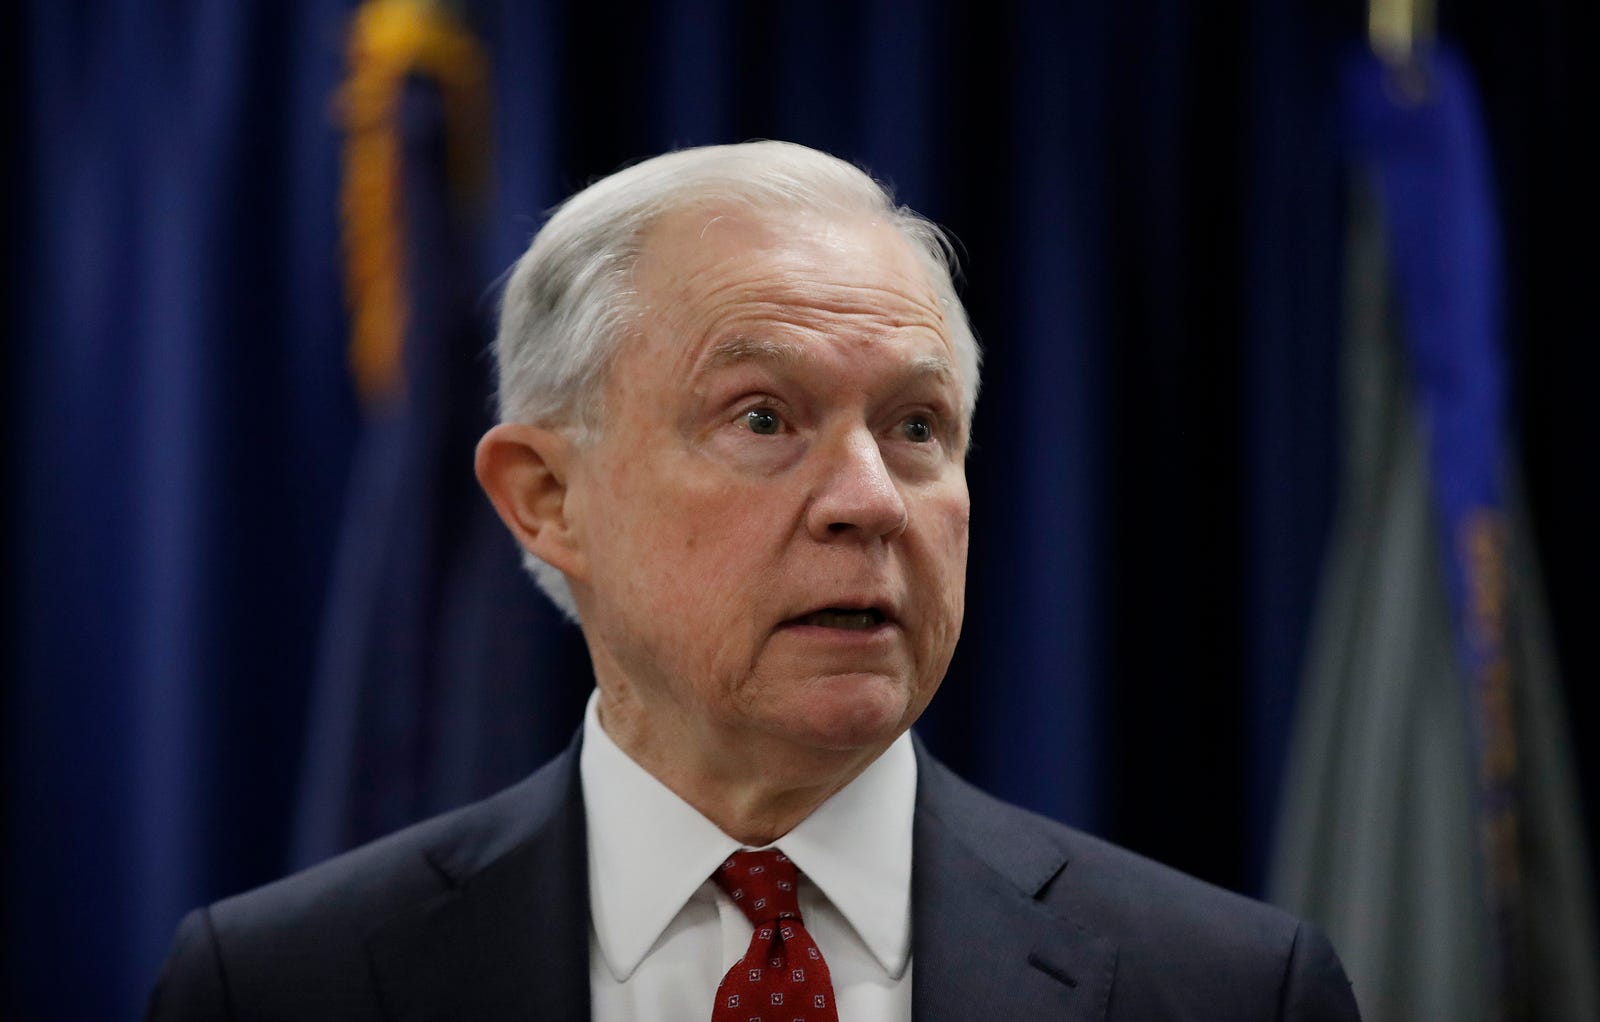 Russian ambassador proves Sessions lied about topics at meeting Sessions concealed